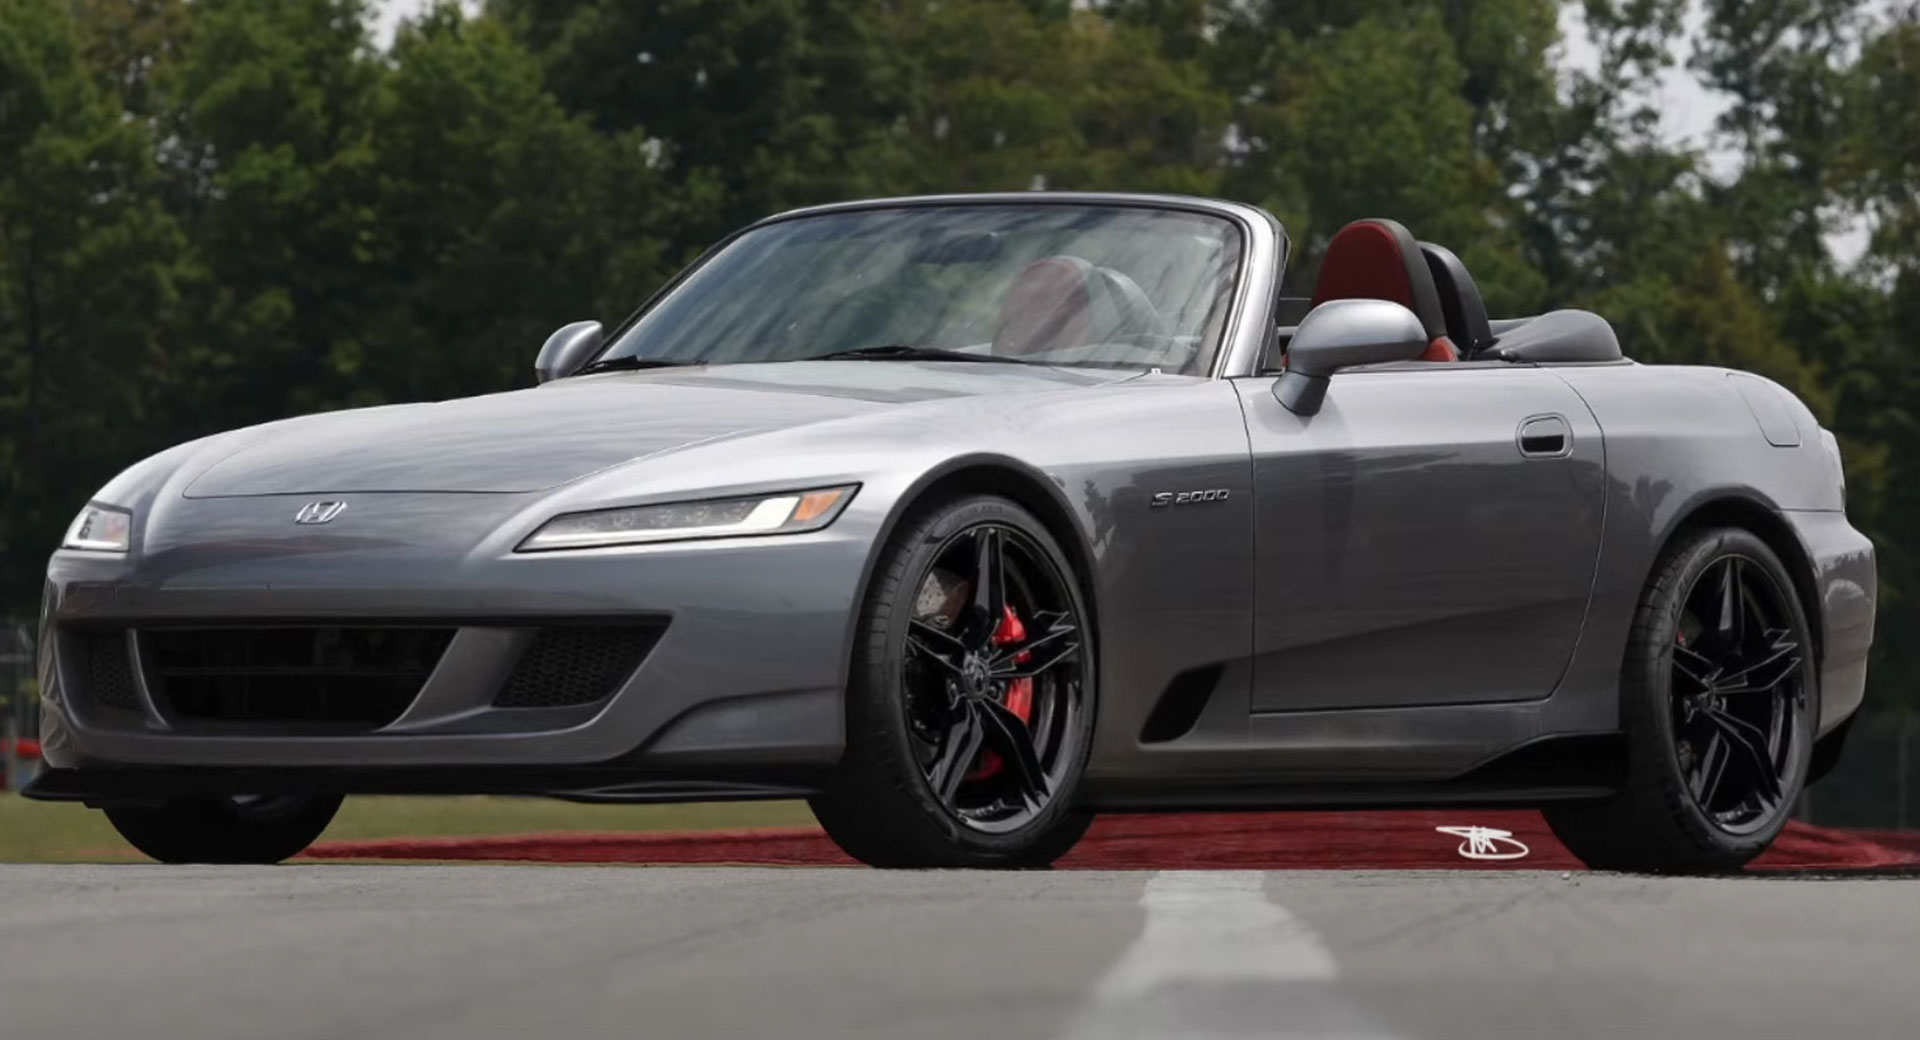 How About A Modern-Day Honda S2000 That Stays True To The Recipe Of The  Original?